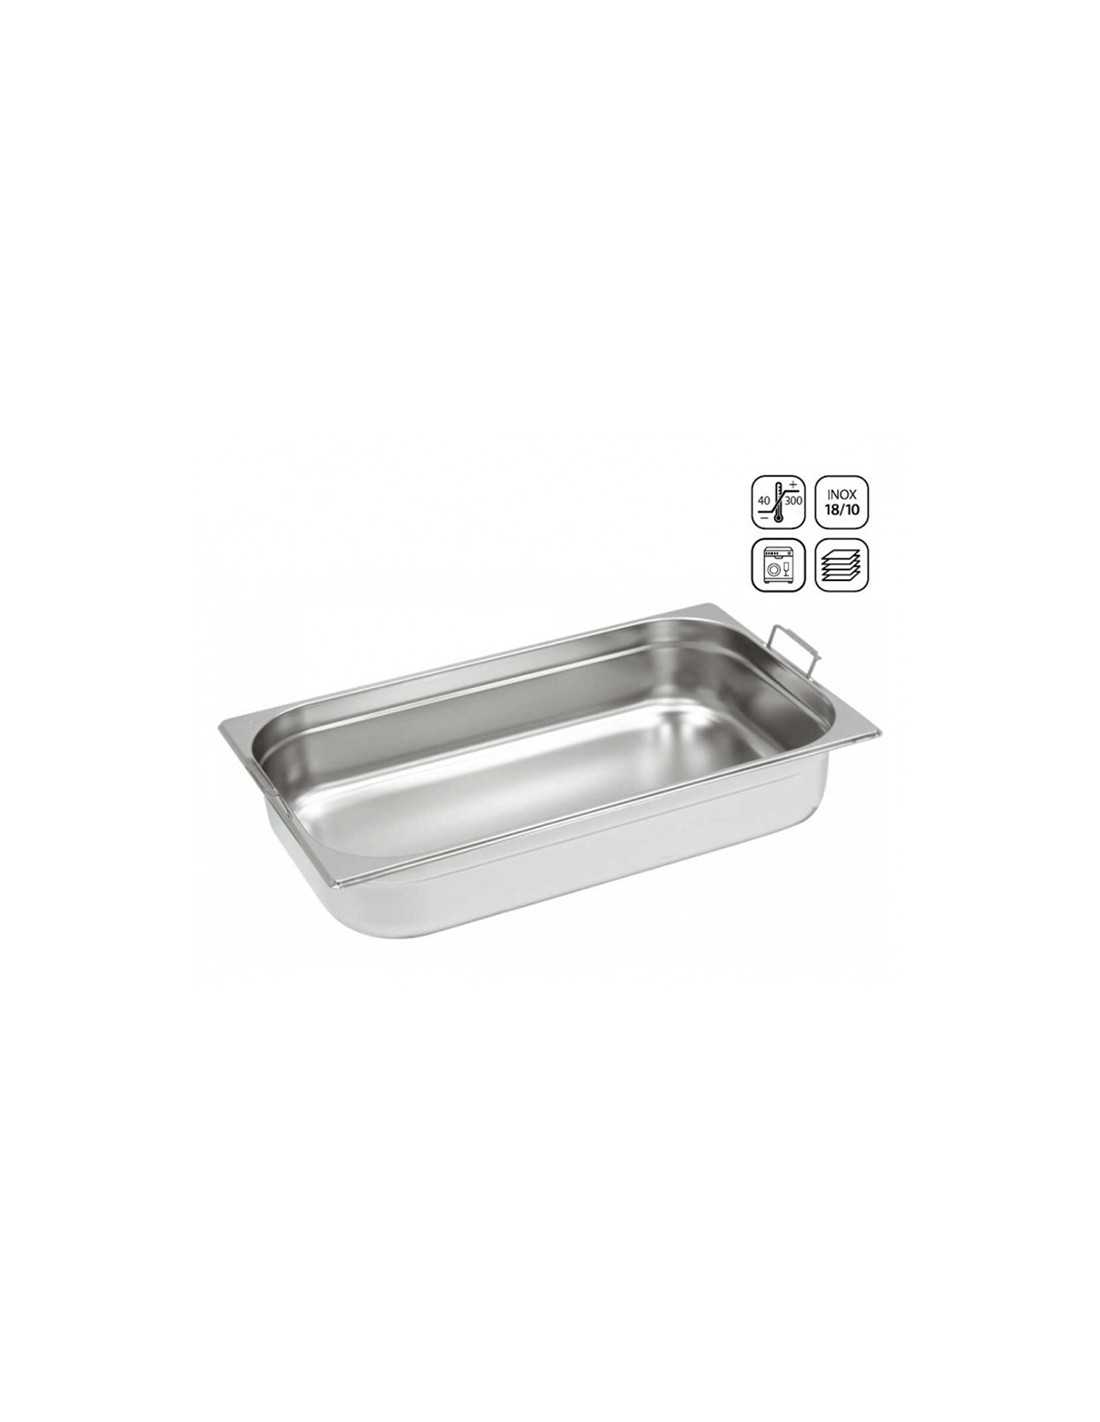 Bac inox gastronorme GN 1/2 profondeur 200 mm.